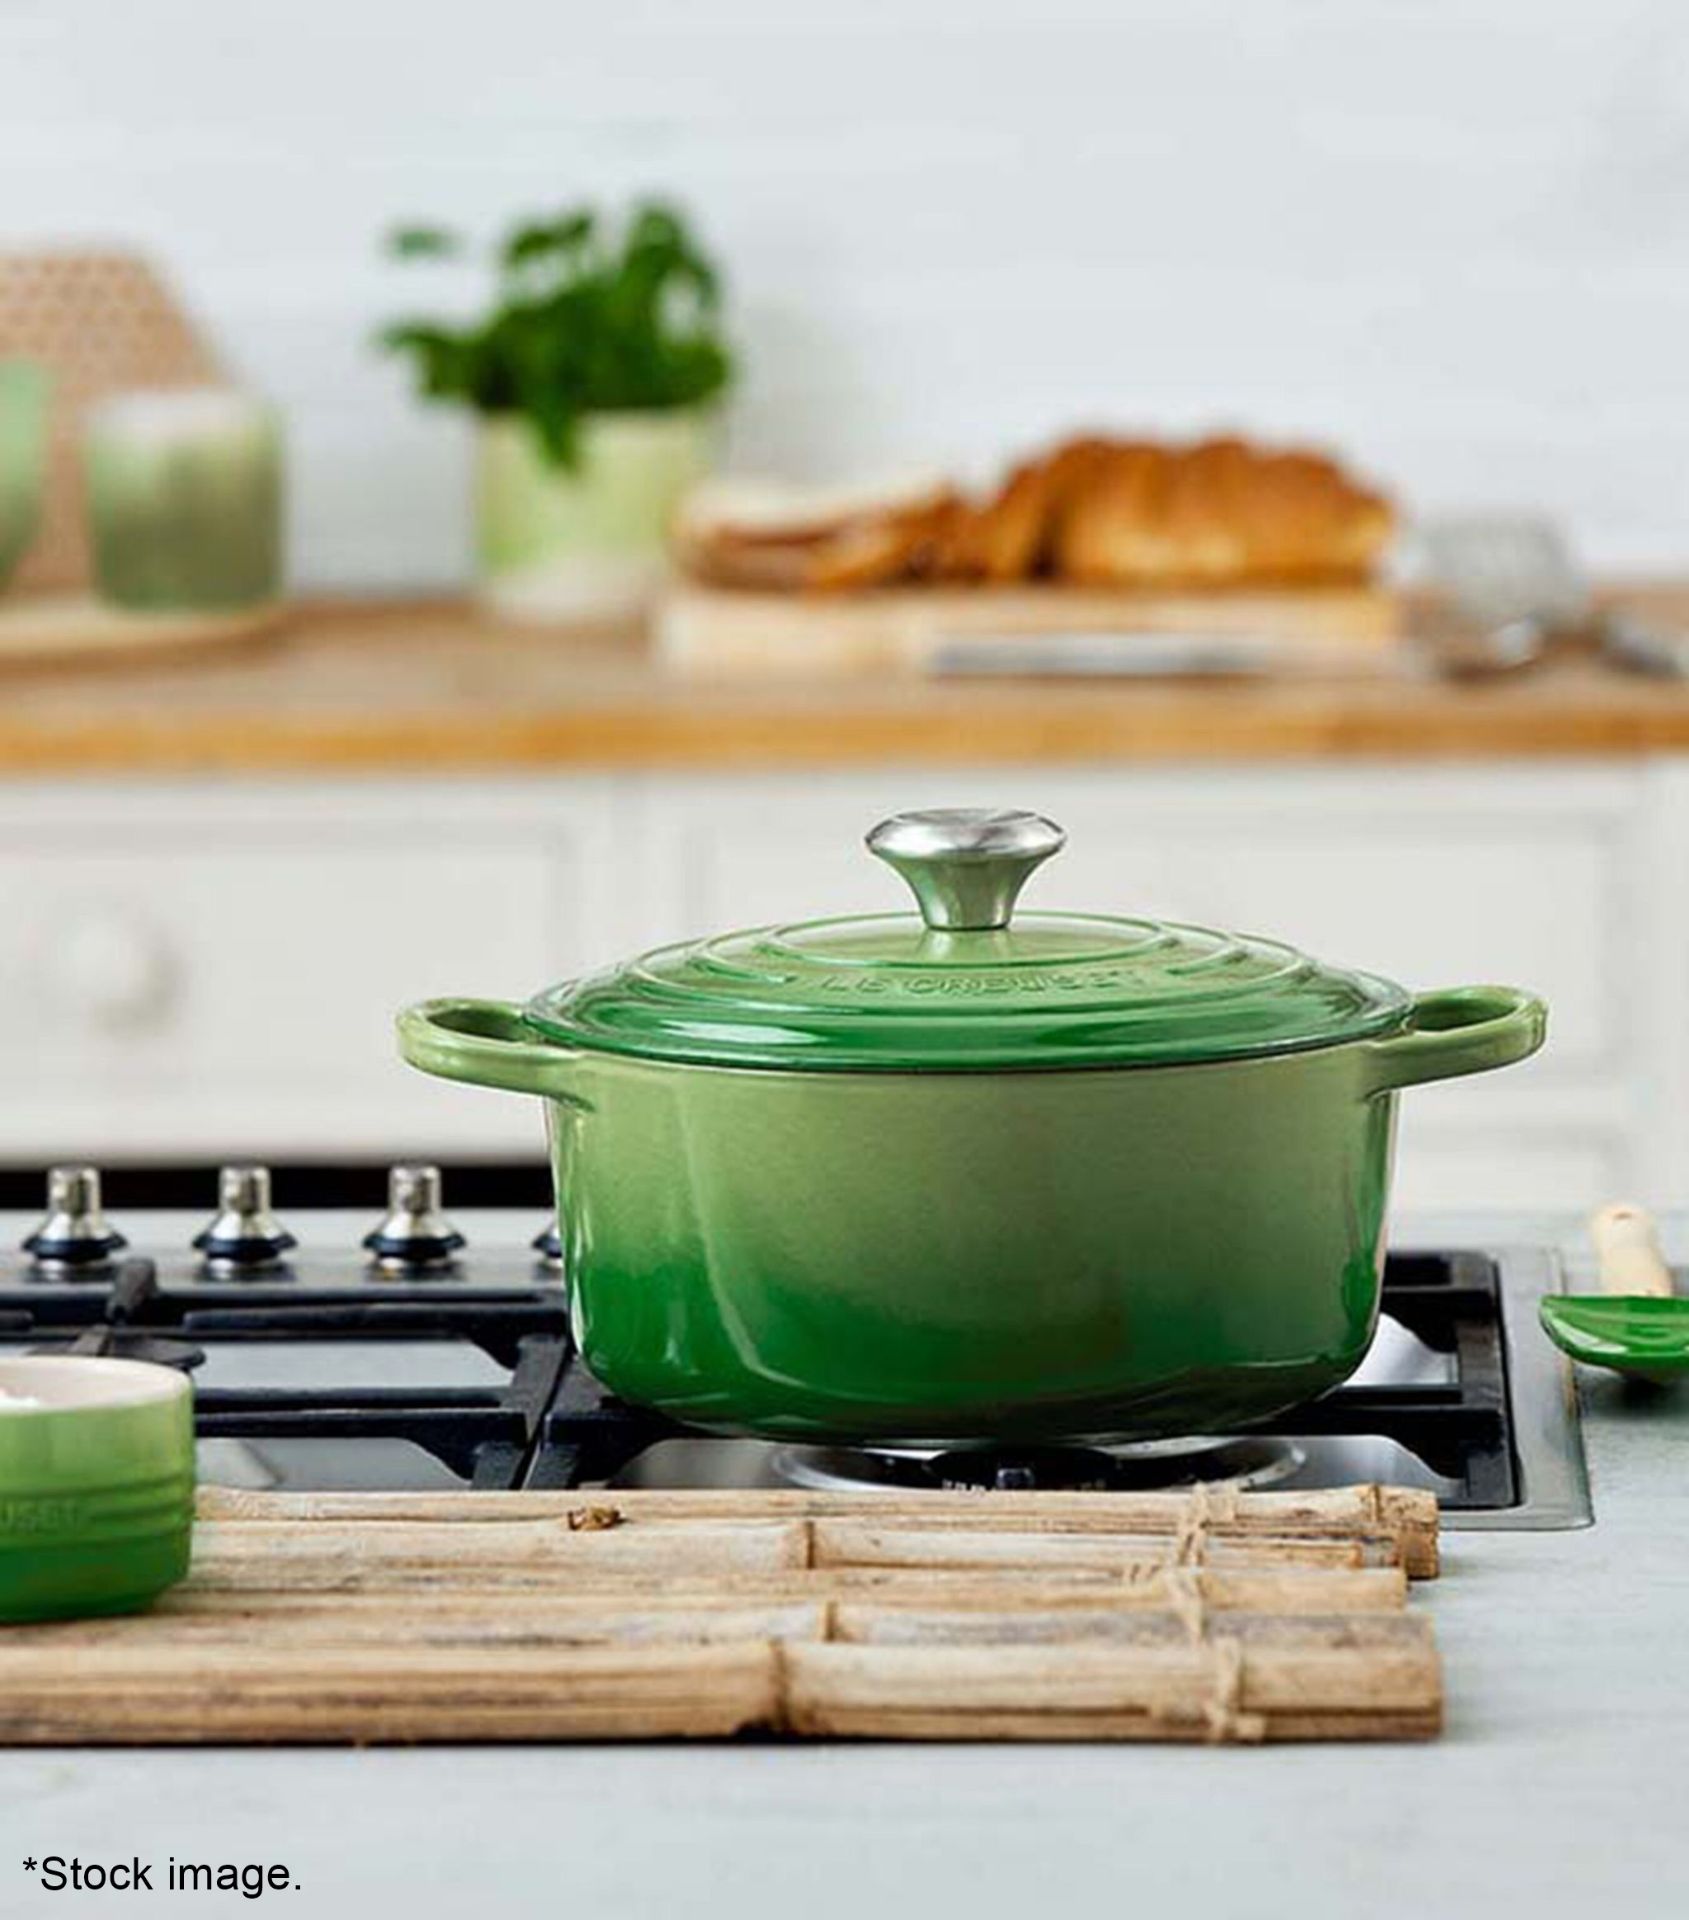 1 x LE CREUSET Enamelled Cast Iron Round Casserole Dish in Bamboo Green (20cm) - RRP £215.00